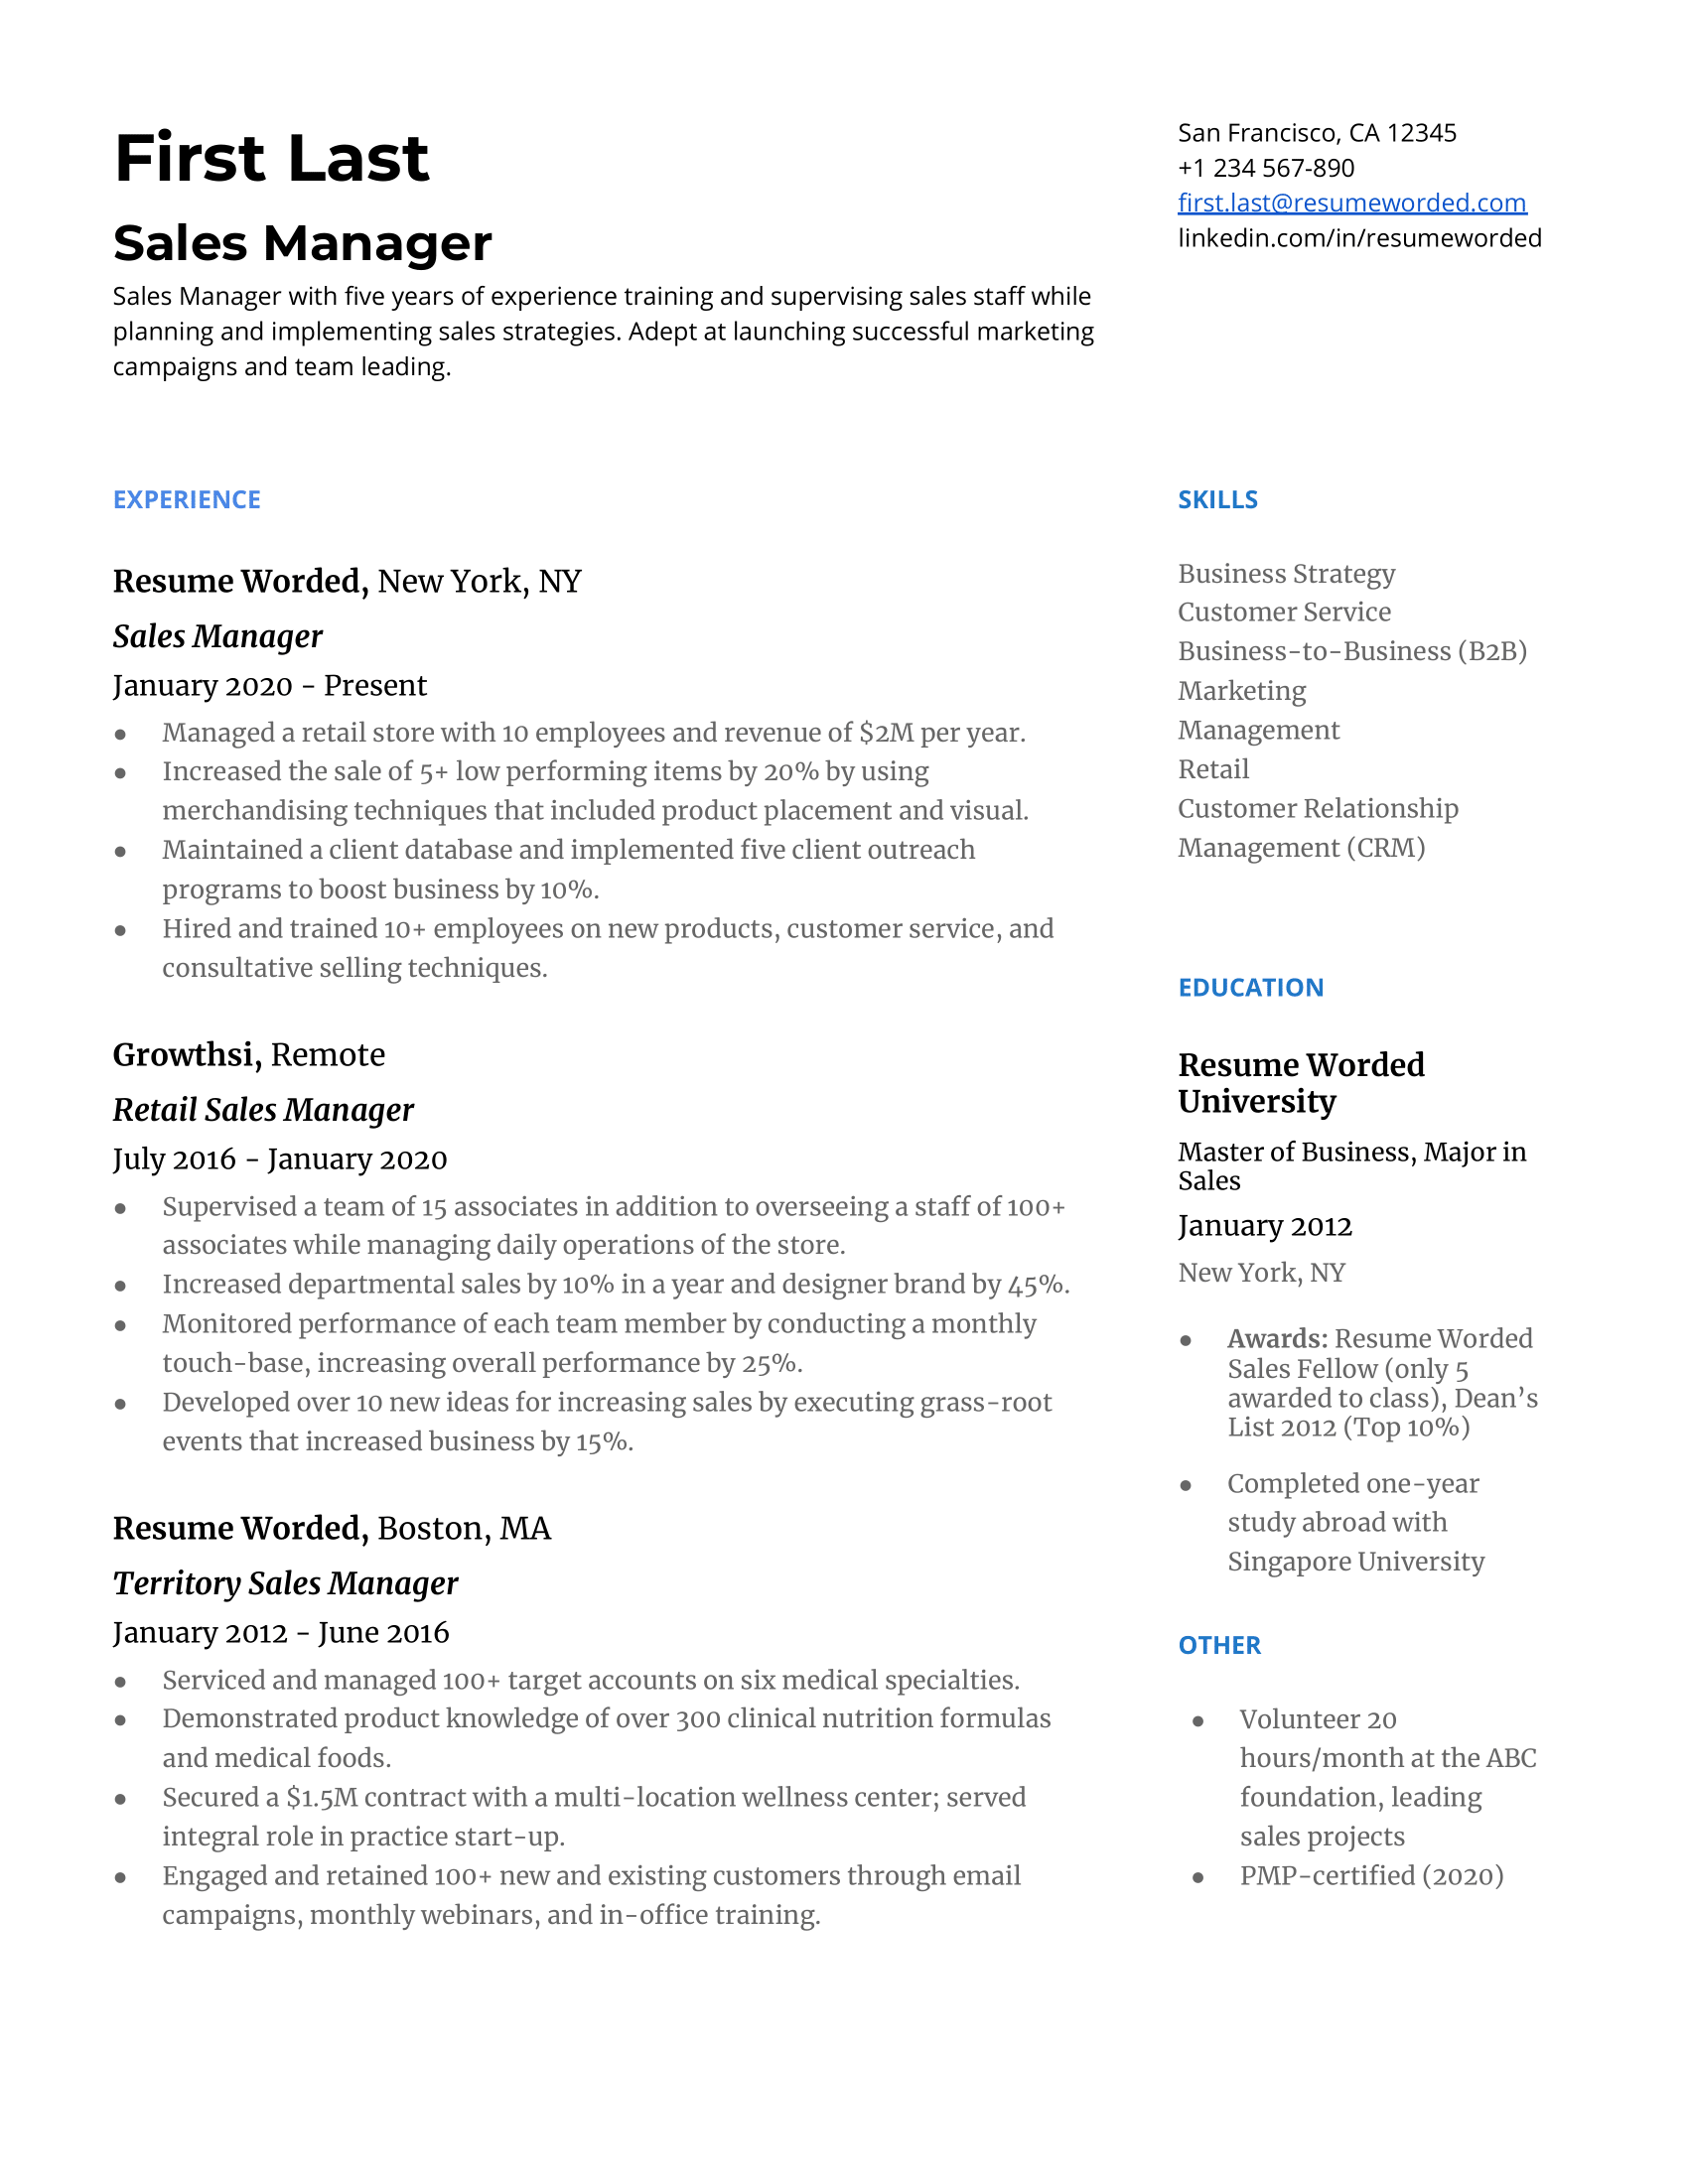 Sales Manager Resume Google Docs in word 2022